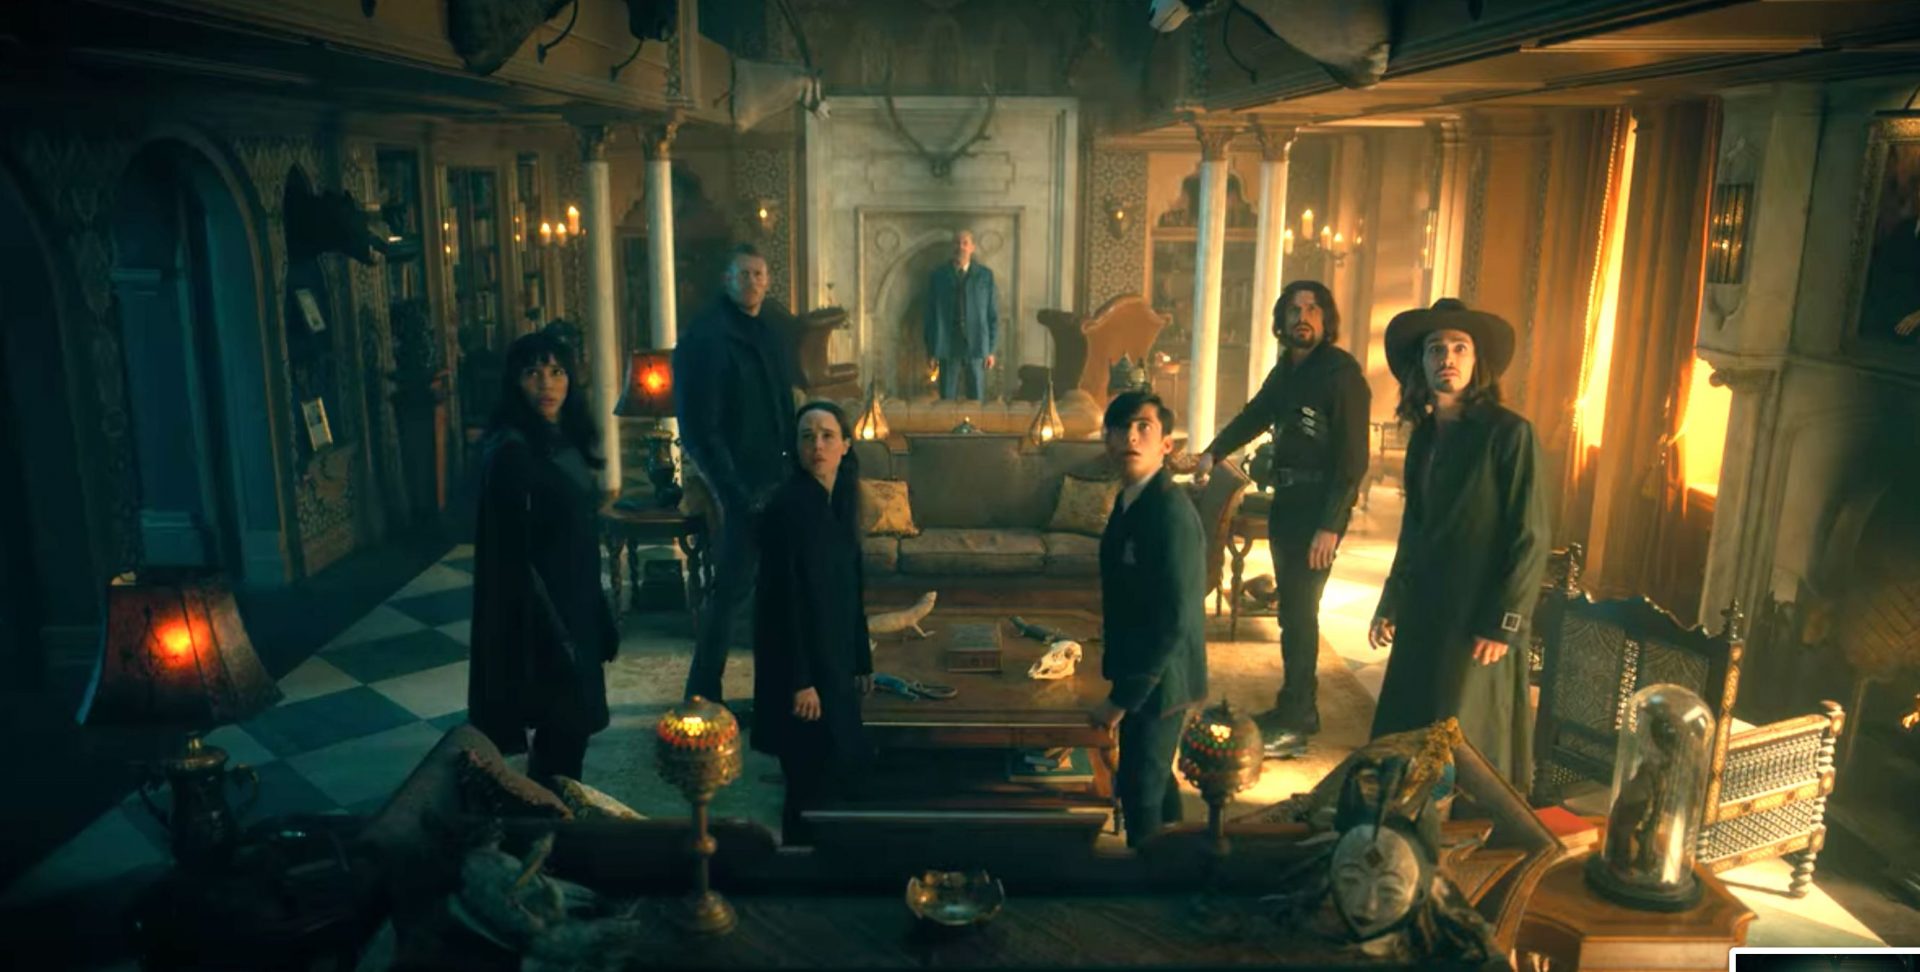 An image from the finale of Umbrella Academy S2 shows the team looking in shock behind them as Reginald Hargreeves stands in front of them